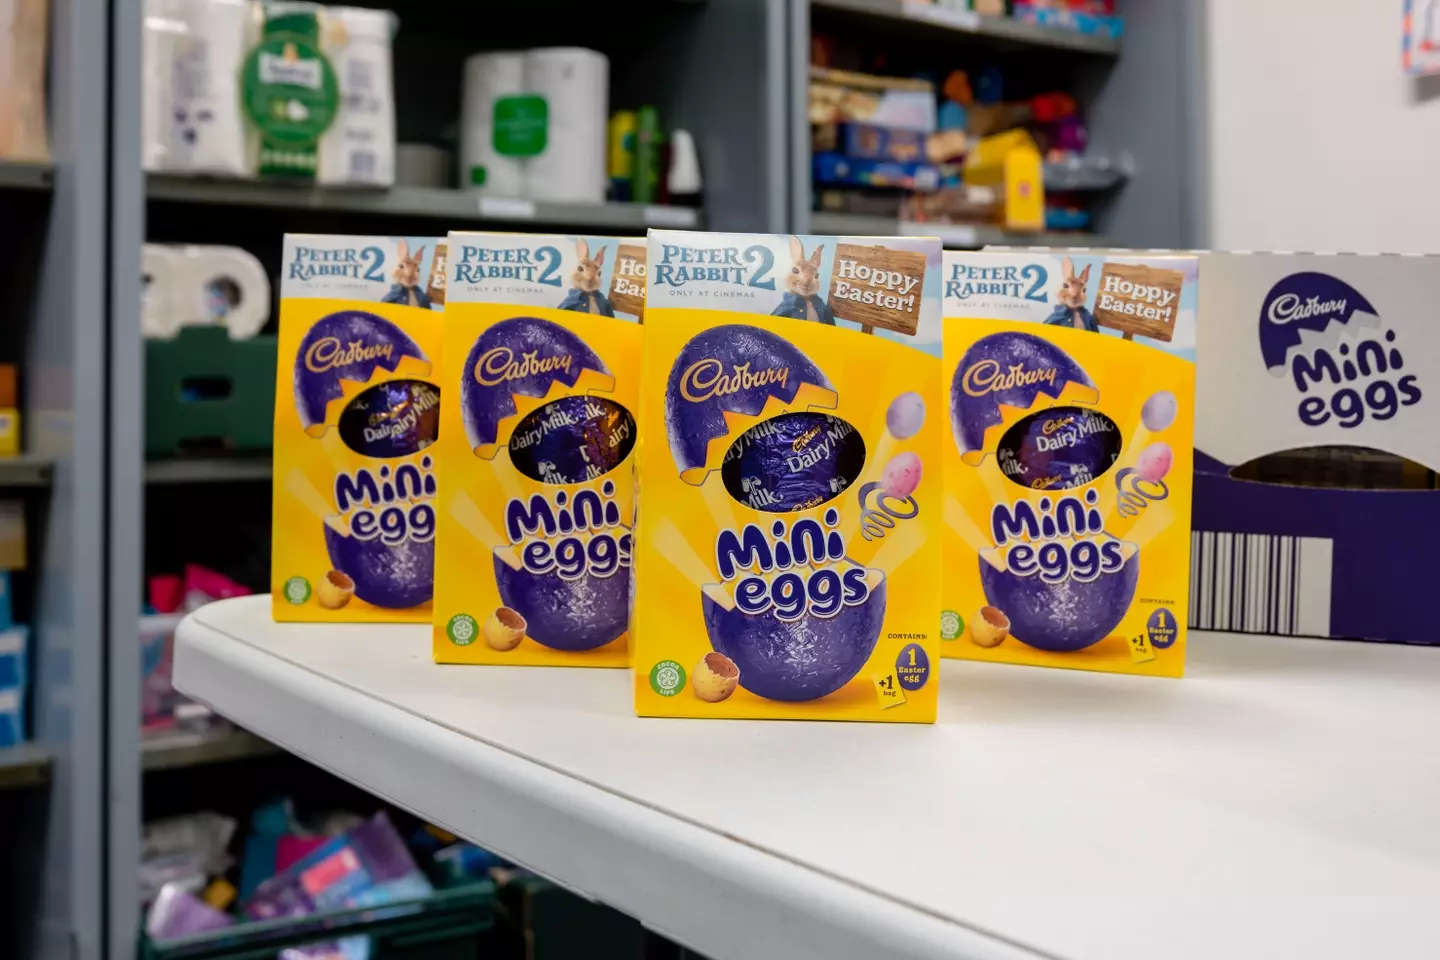 Looks like we're all getting mini eggs this year.